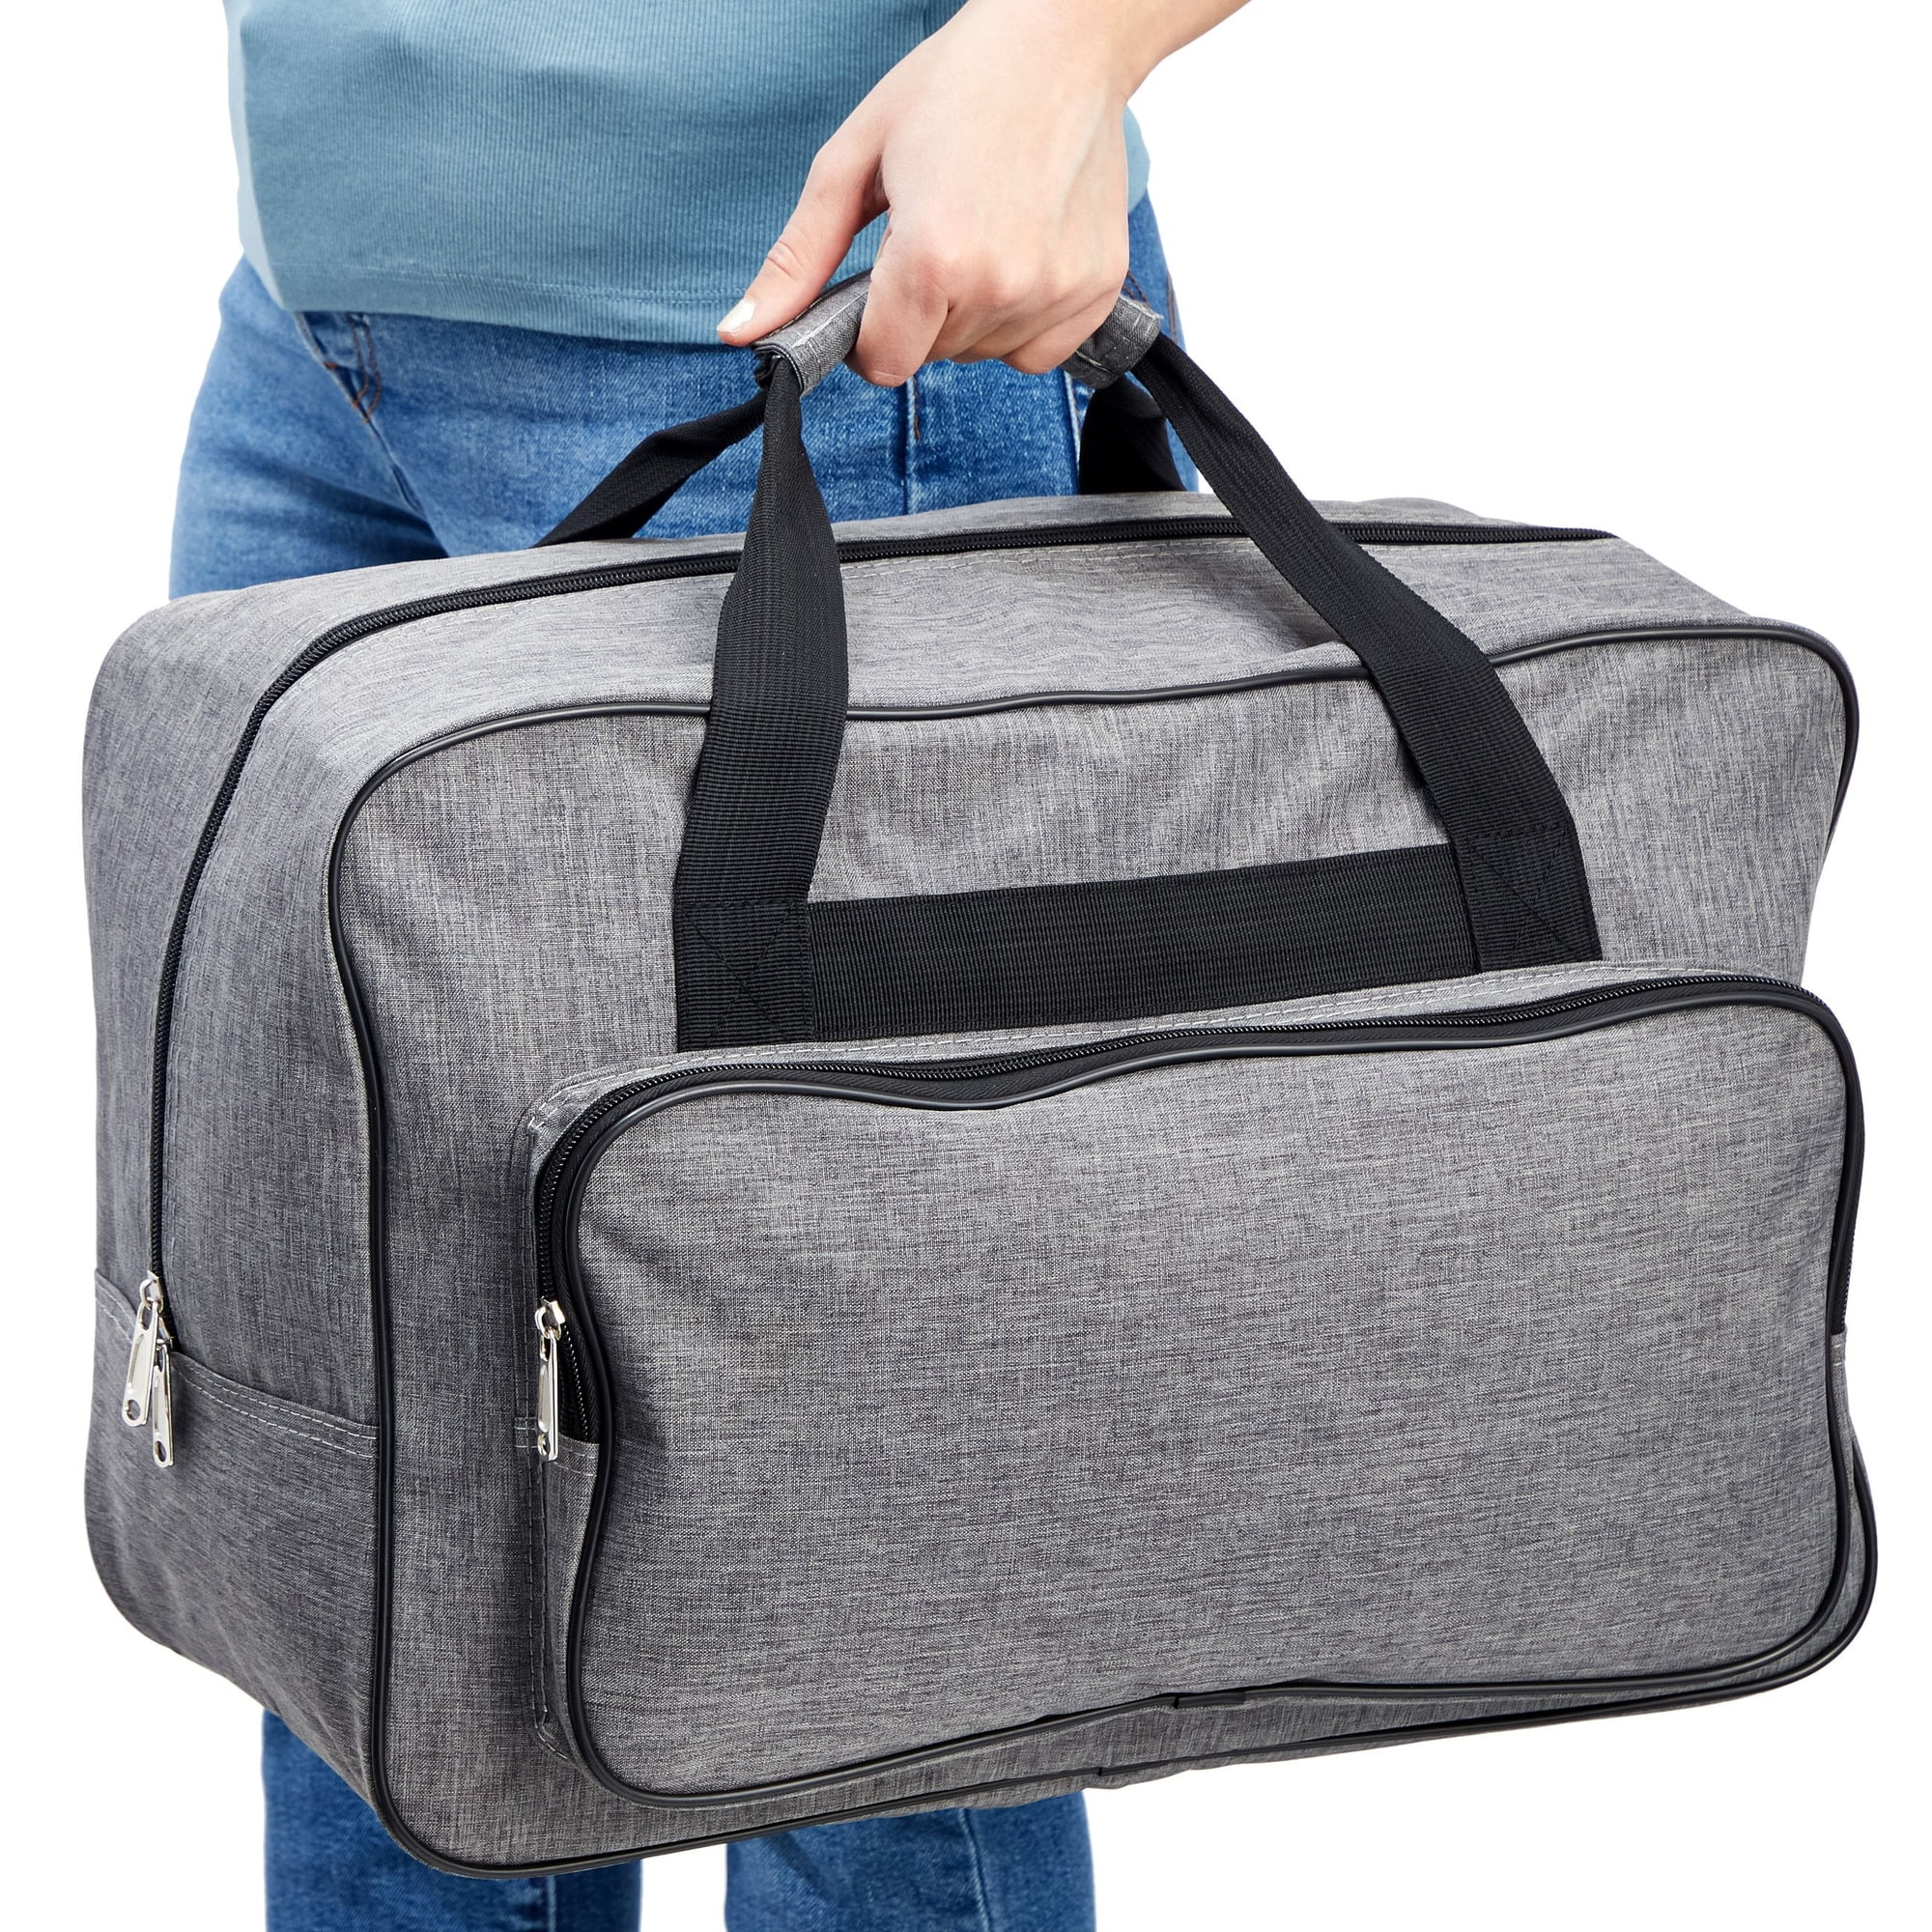 Domqga Sewing Machine Bag, Large Capacity Sewing Machine Carrying Case for Home for Travel, Gray